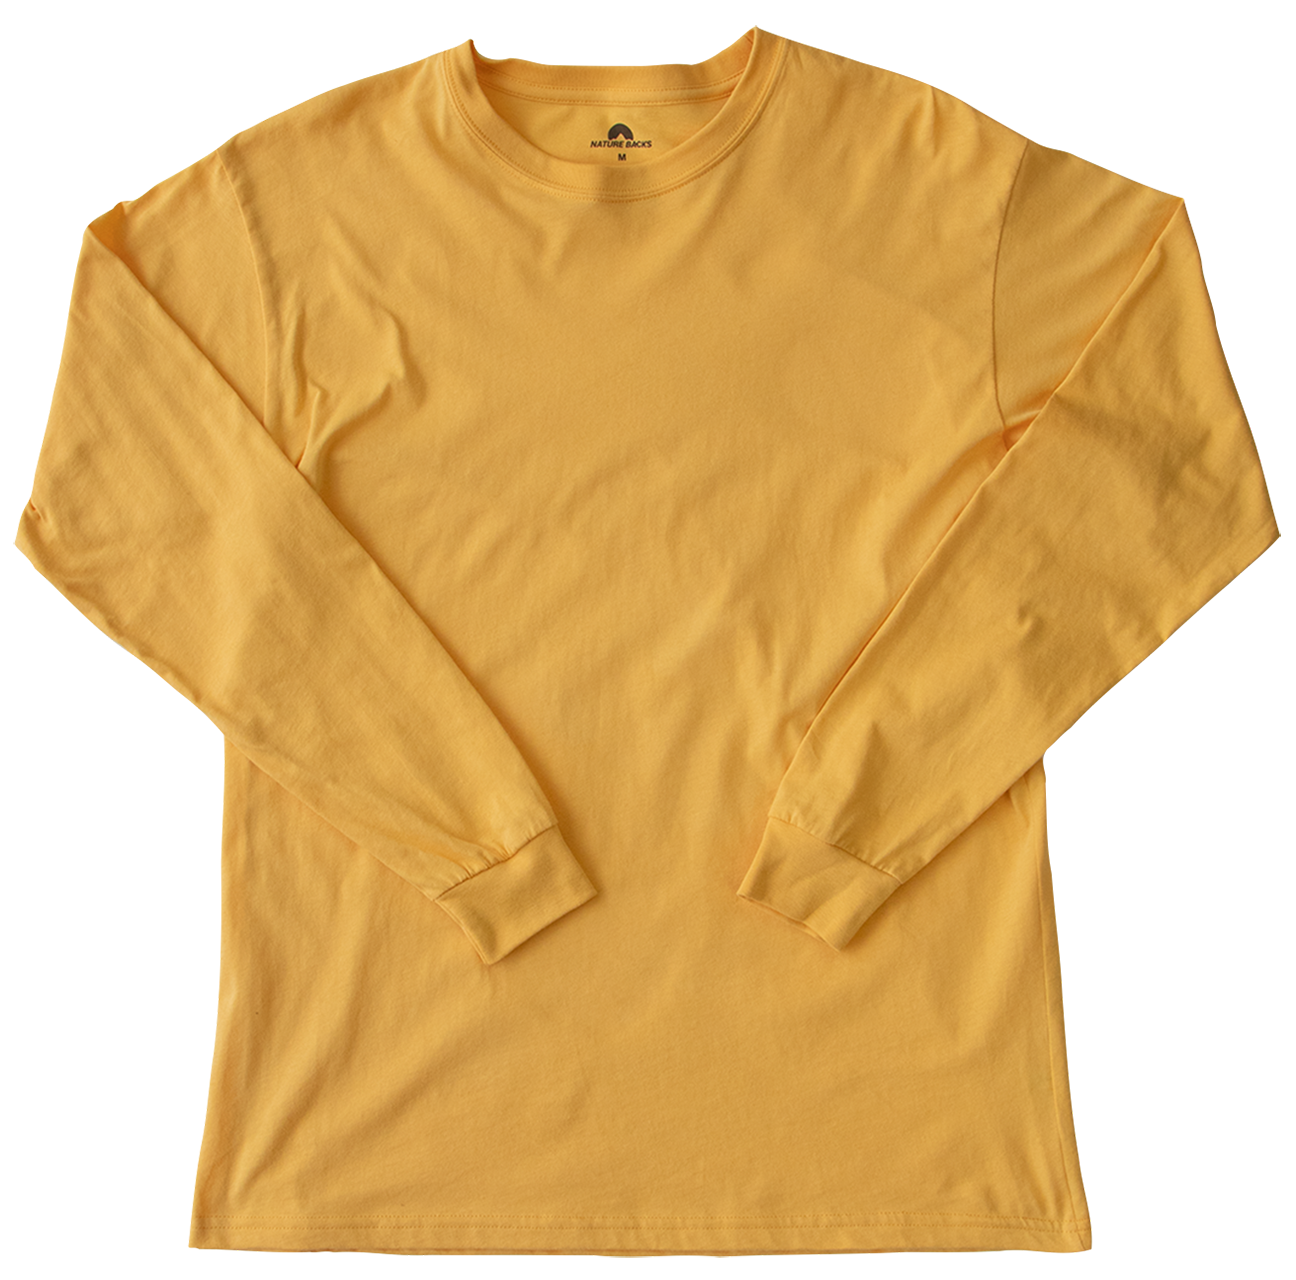 Nature Backs Long Sleeve 100% Organic Cotton T-Shirt | Minimalist Sunrise Long Sleeve made with Eco-Friendly Fibers Sustainably made in the USA 